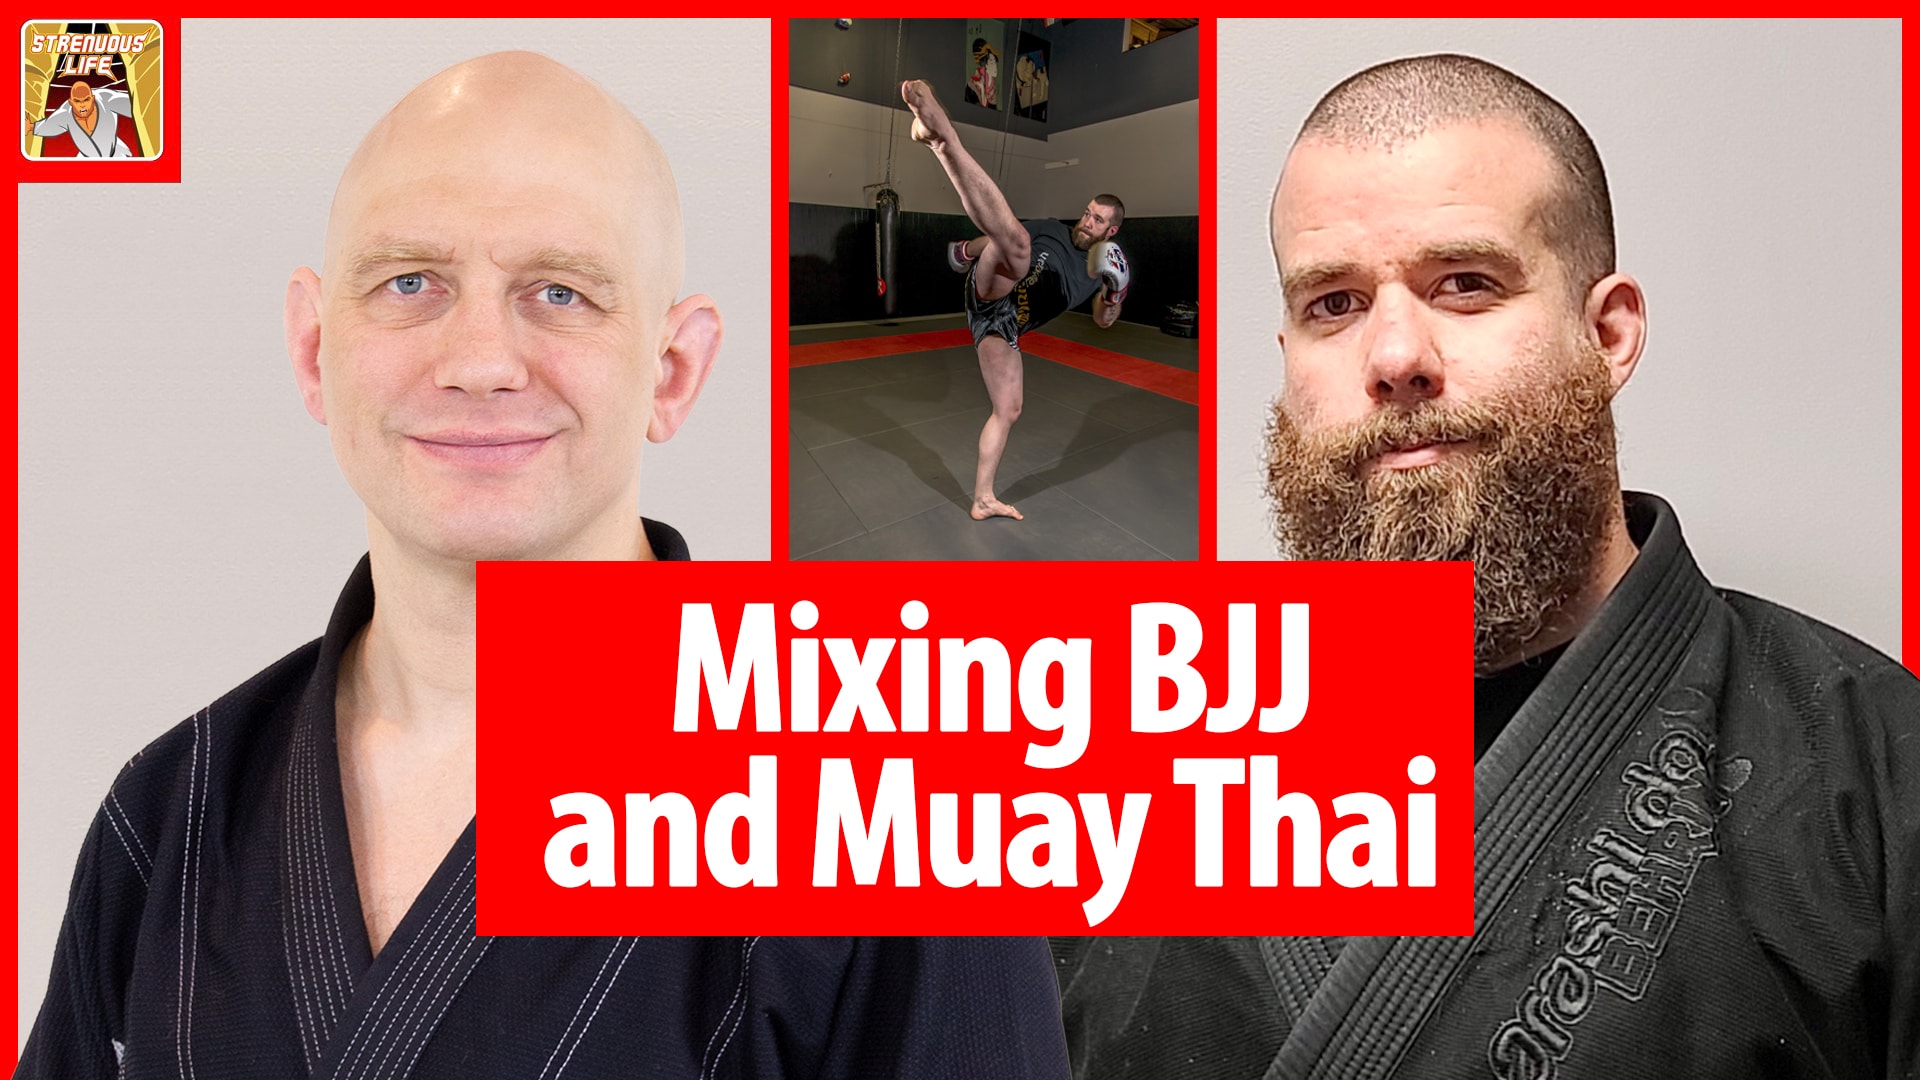 Combining BJJ and Muay Thai